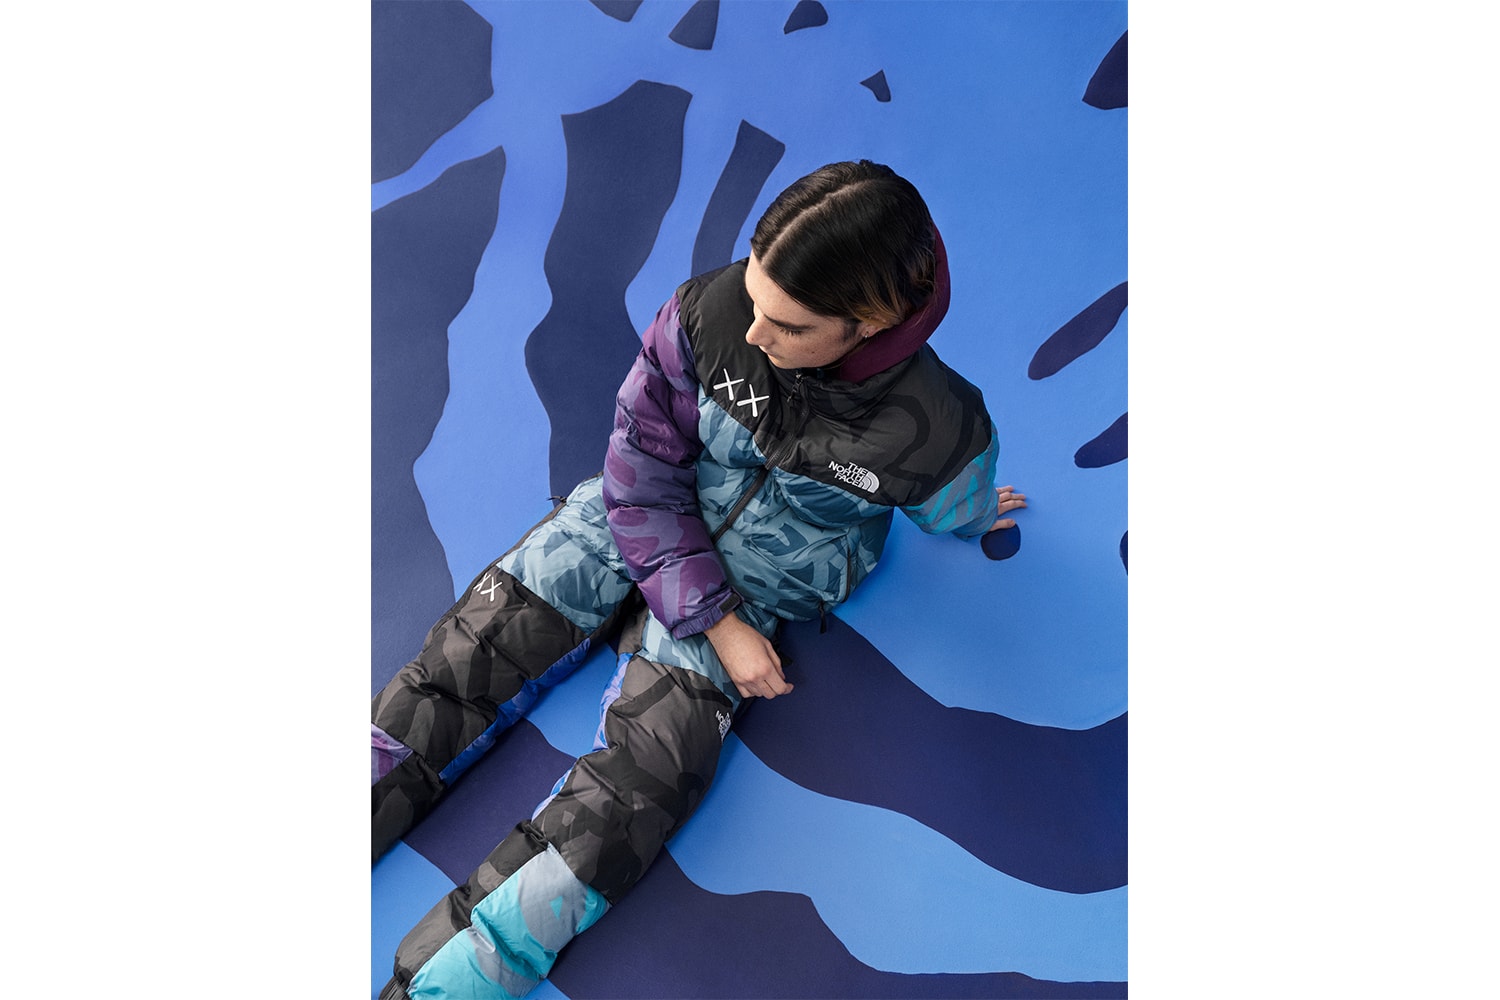 KAWS The North Face XX Collection Full Look Outerwear Jackets Release Date Info